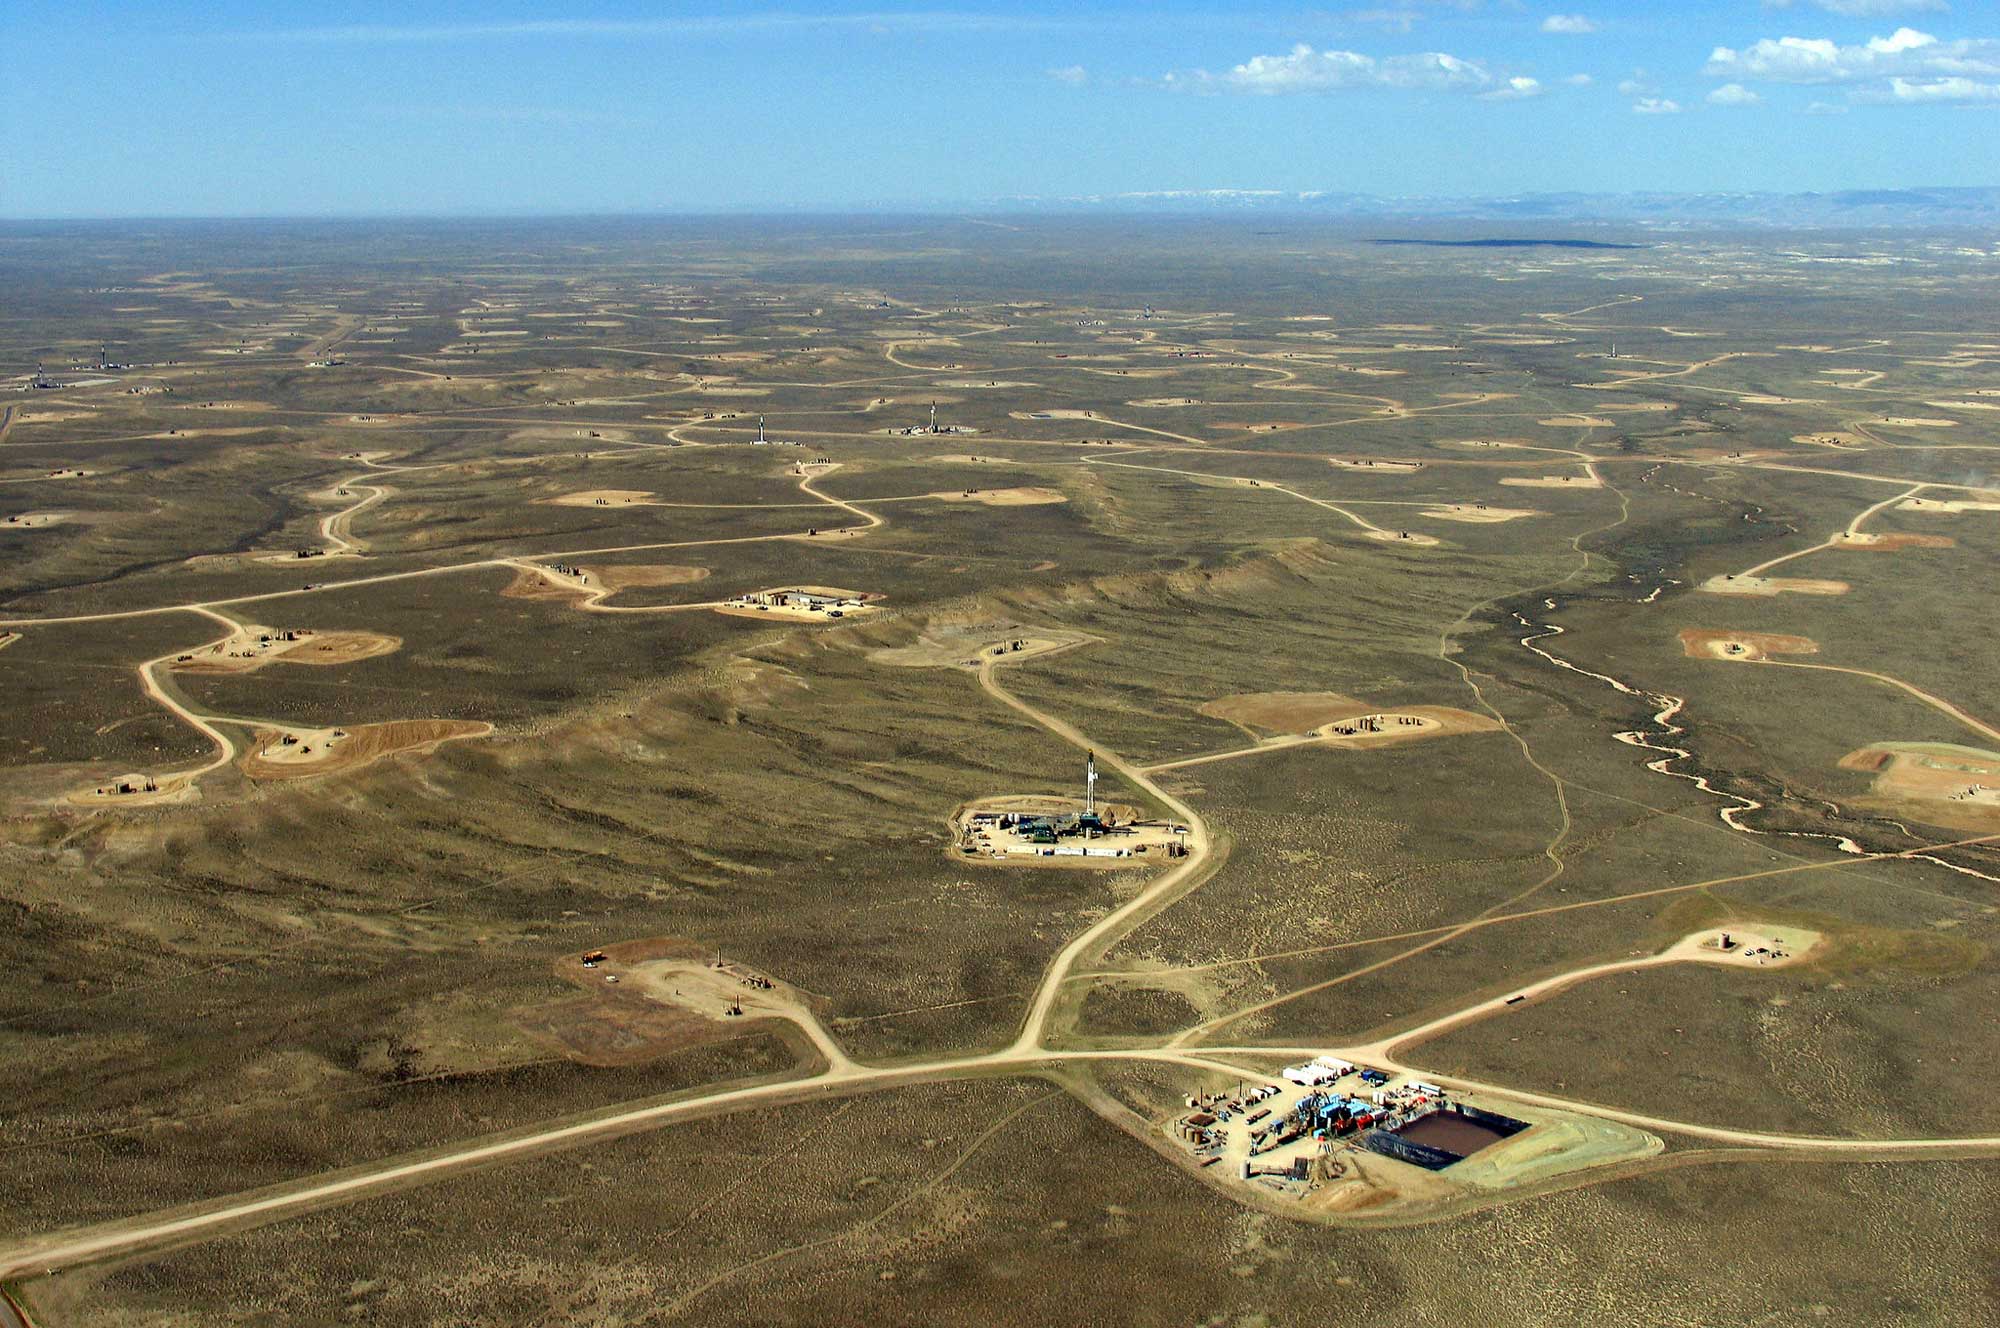 Aerial photograph of the Jonah Gas Field in Wyoming. The photo shows a flat, brown landscape with a network of dirt roads that have branches that end in oil well pads, cleared rectangular areas that support drilling and pumping equipment.